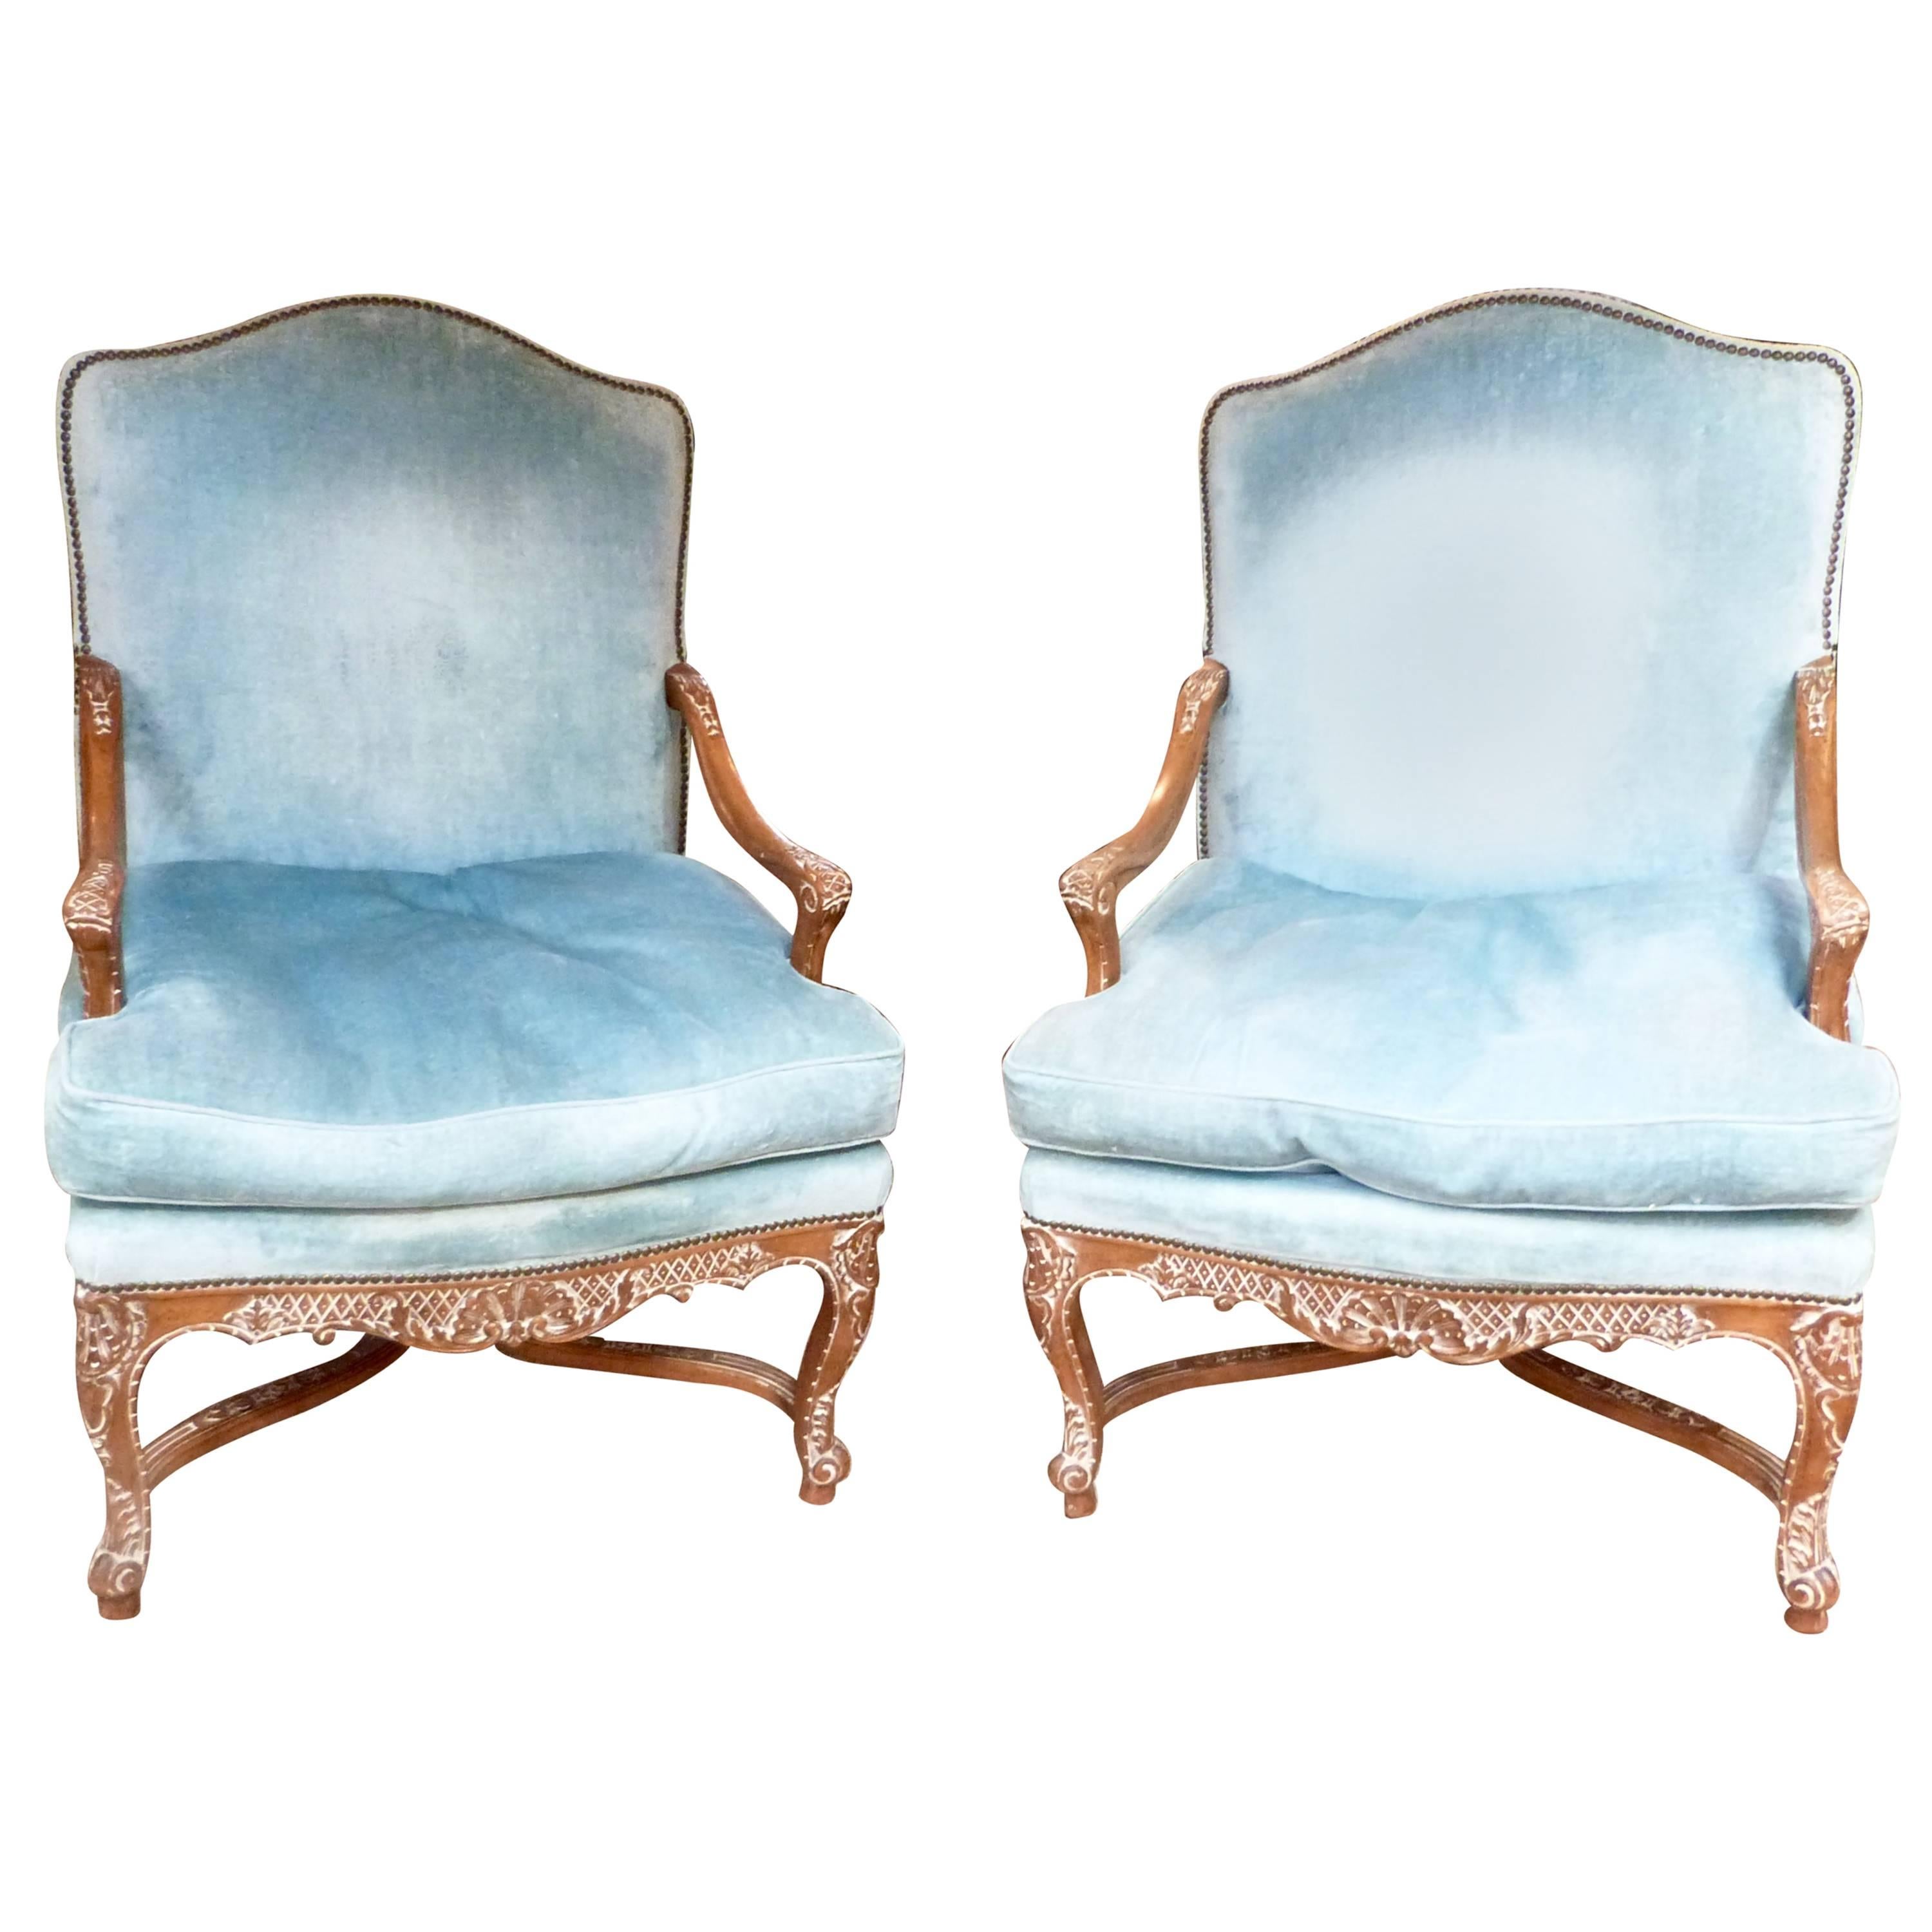 Pair of Swedish Rococo Style Armchairs For Sale